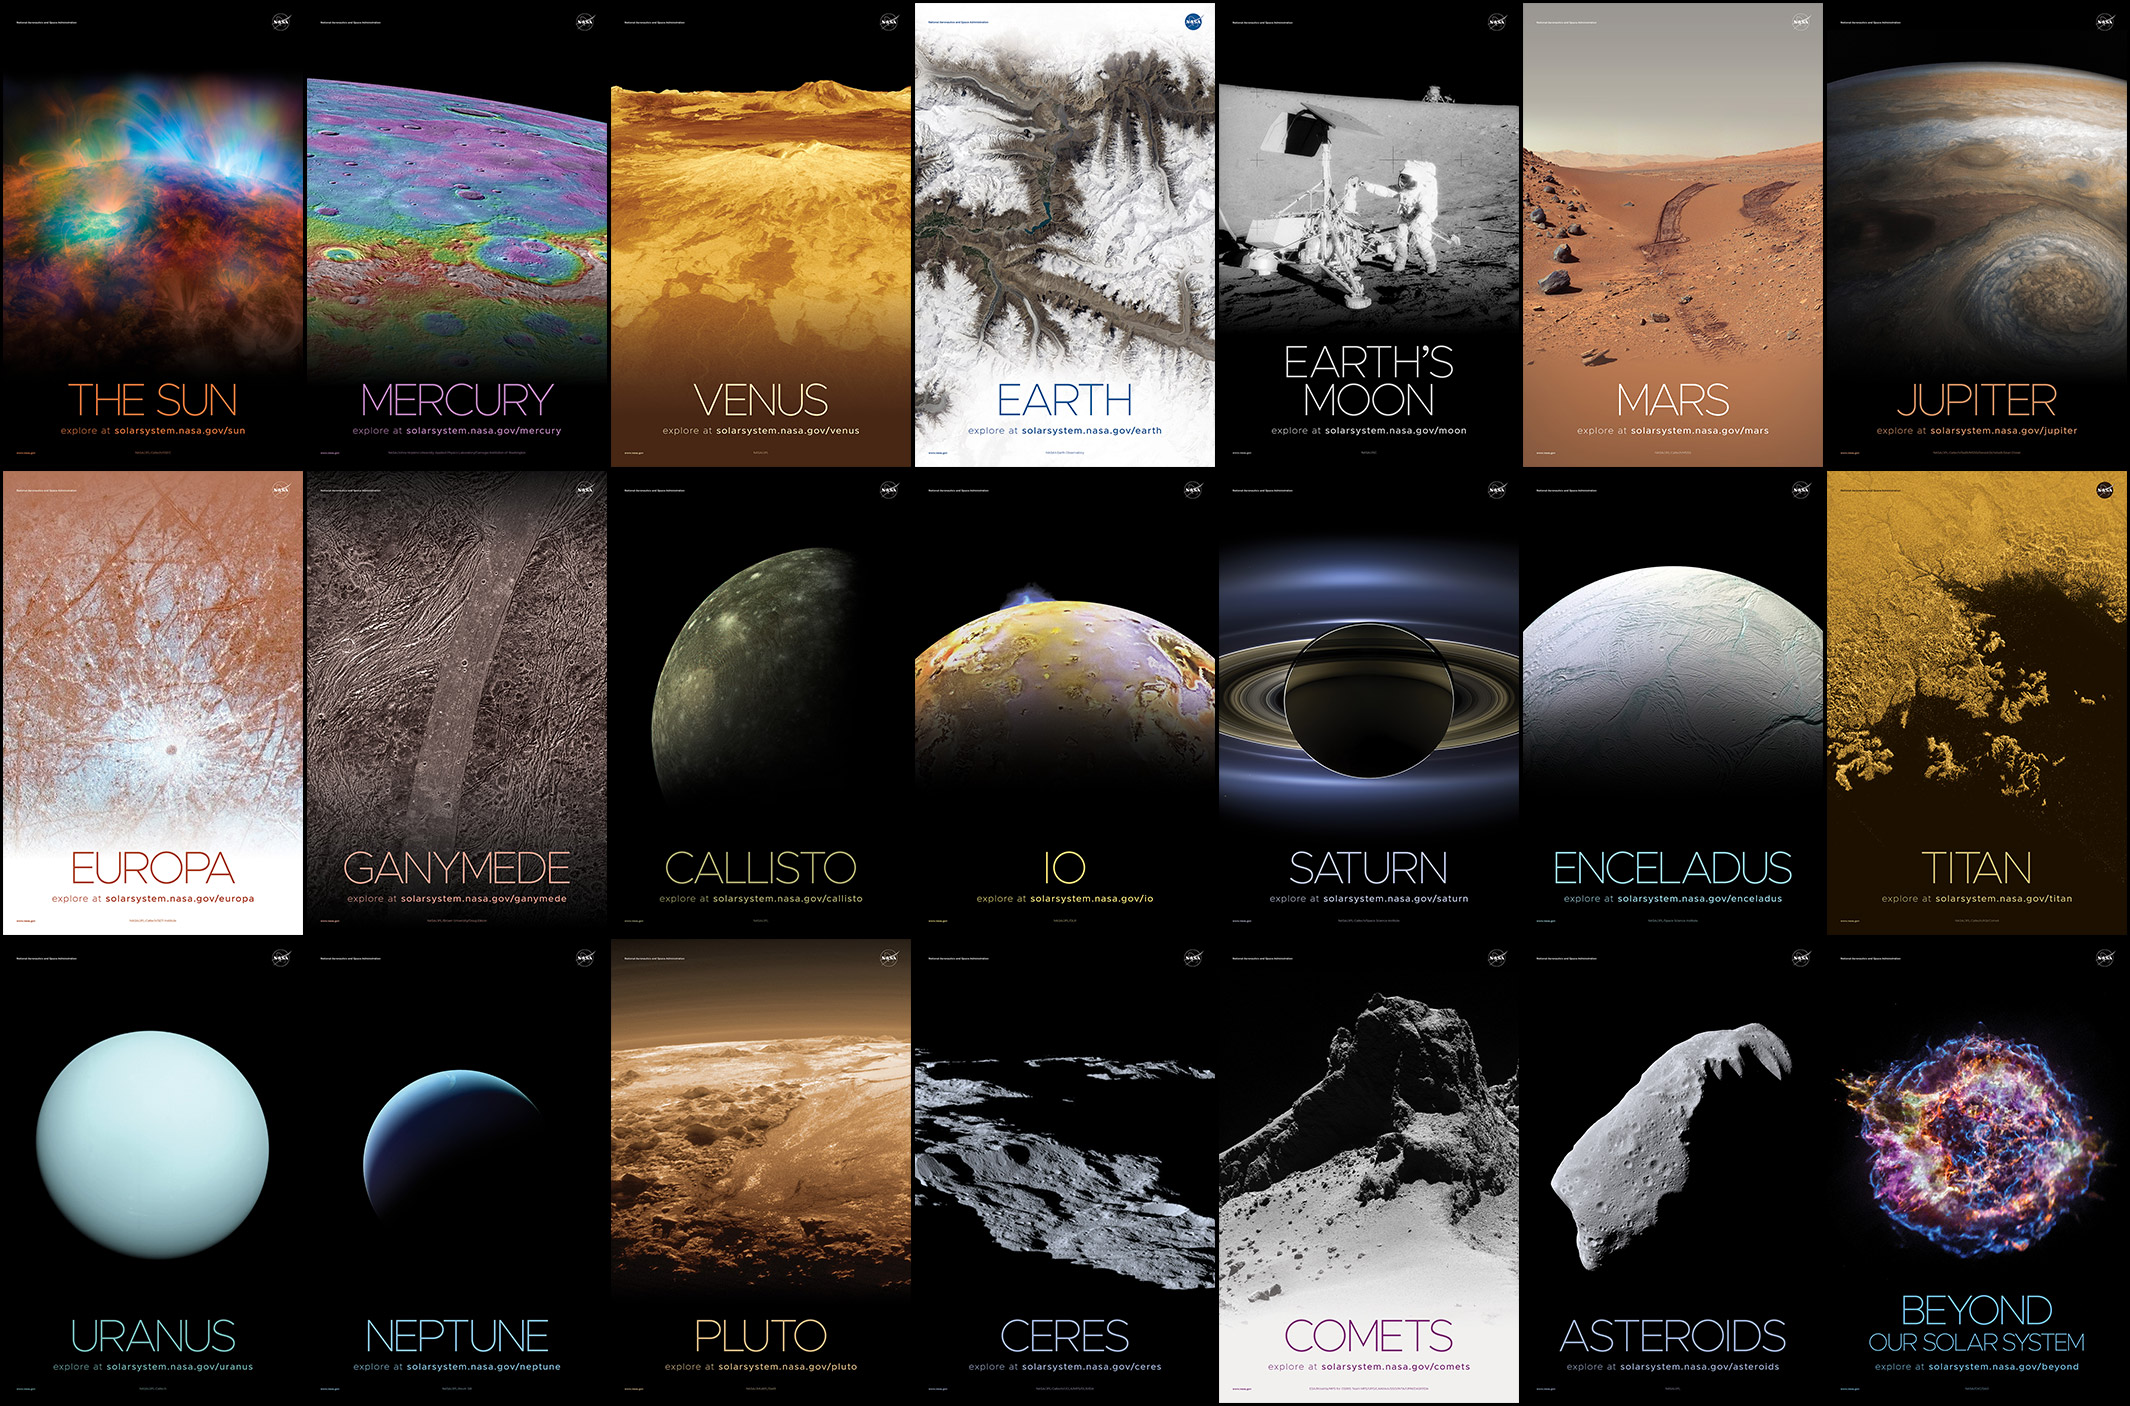 individual pictures of the planets